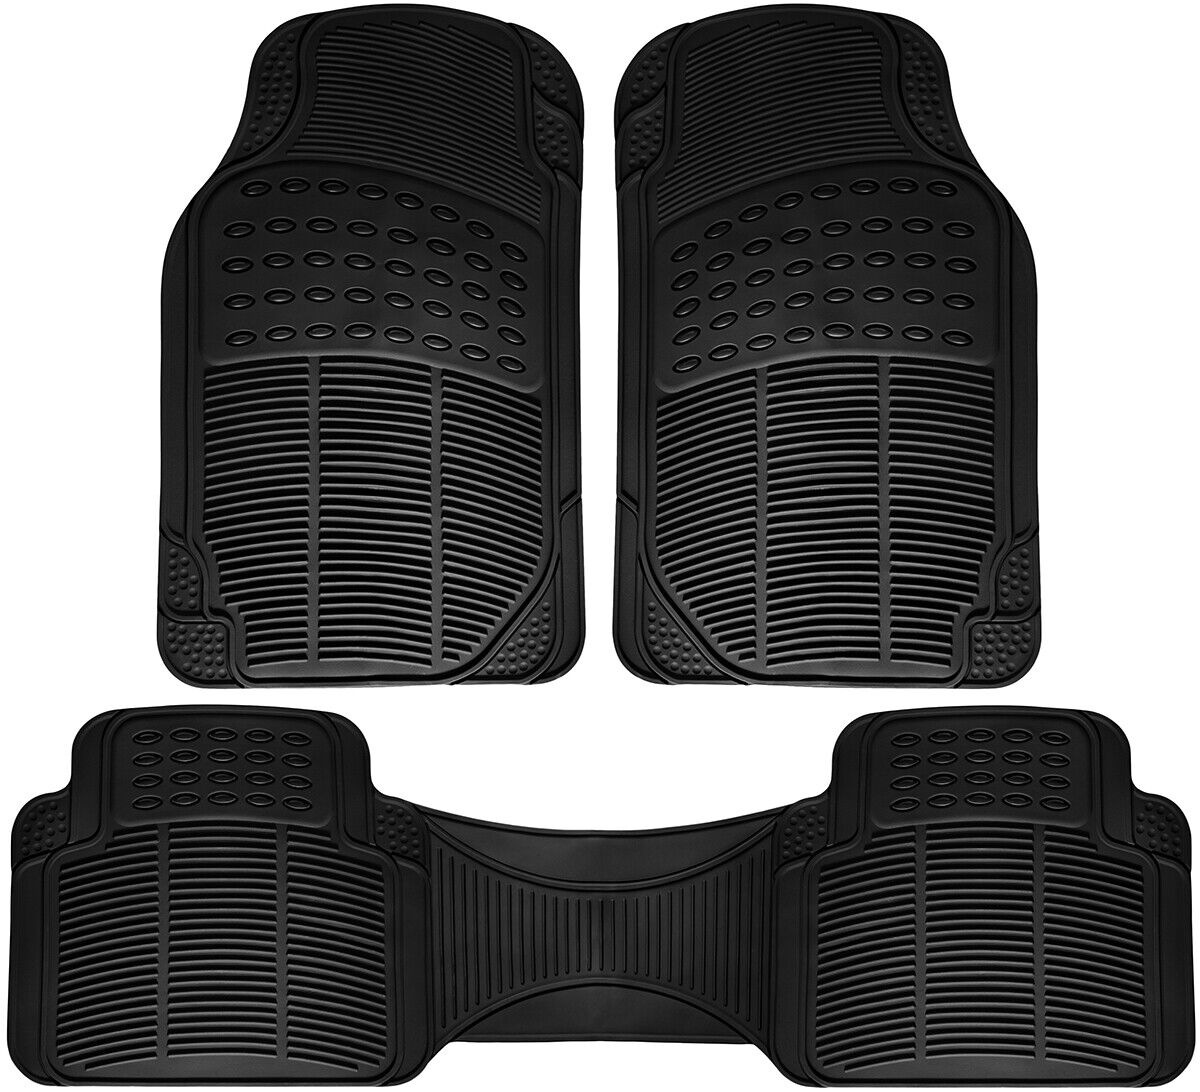 Auto Floor Mats for BMW Car SUV 3pc Set All Weather Rubber Semi Custom Fit Black